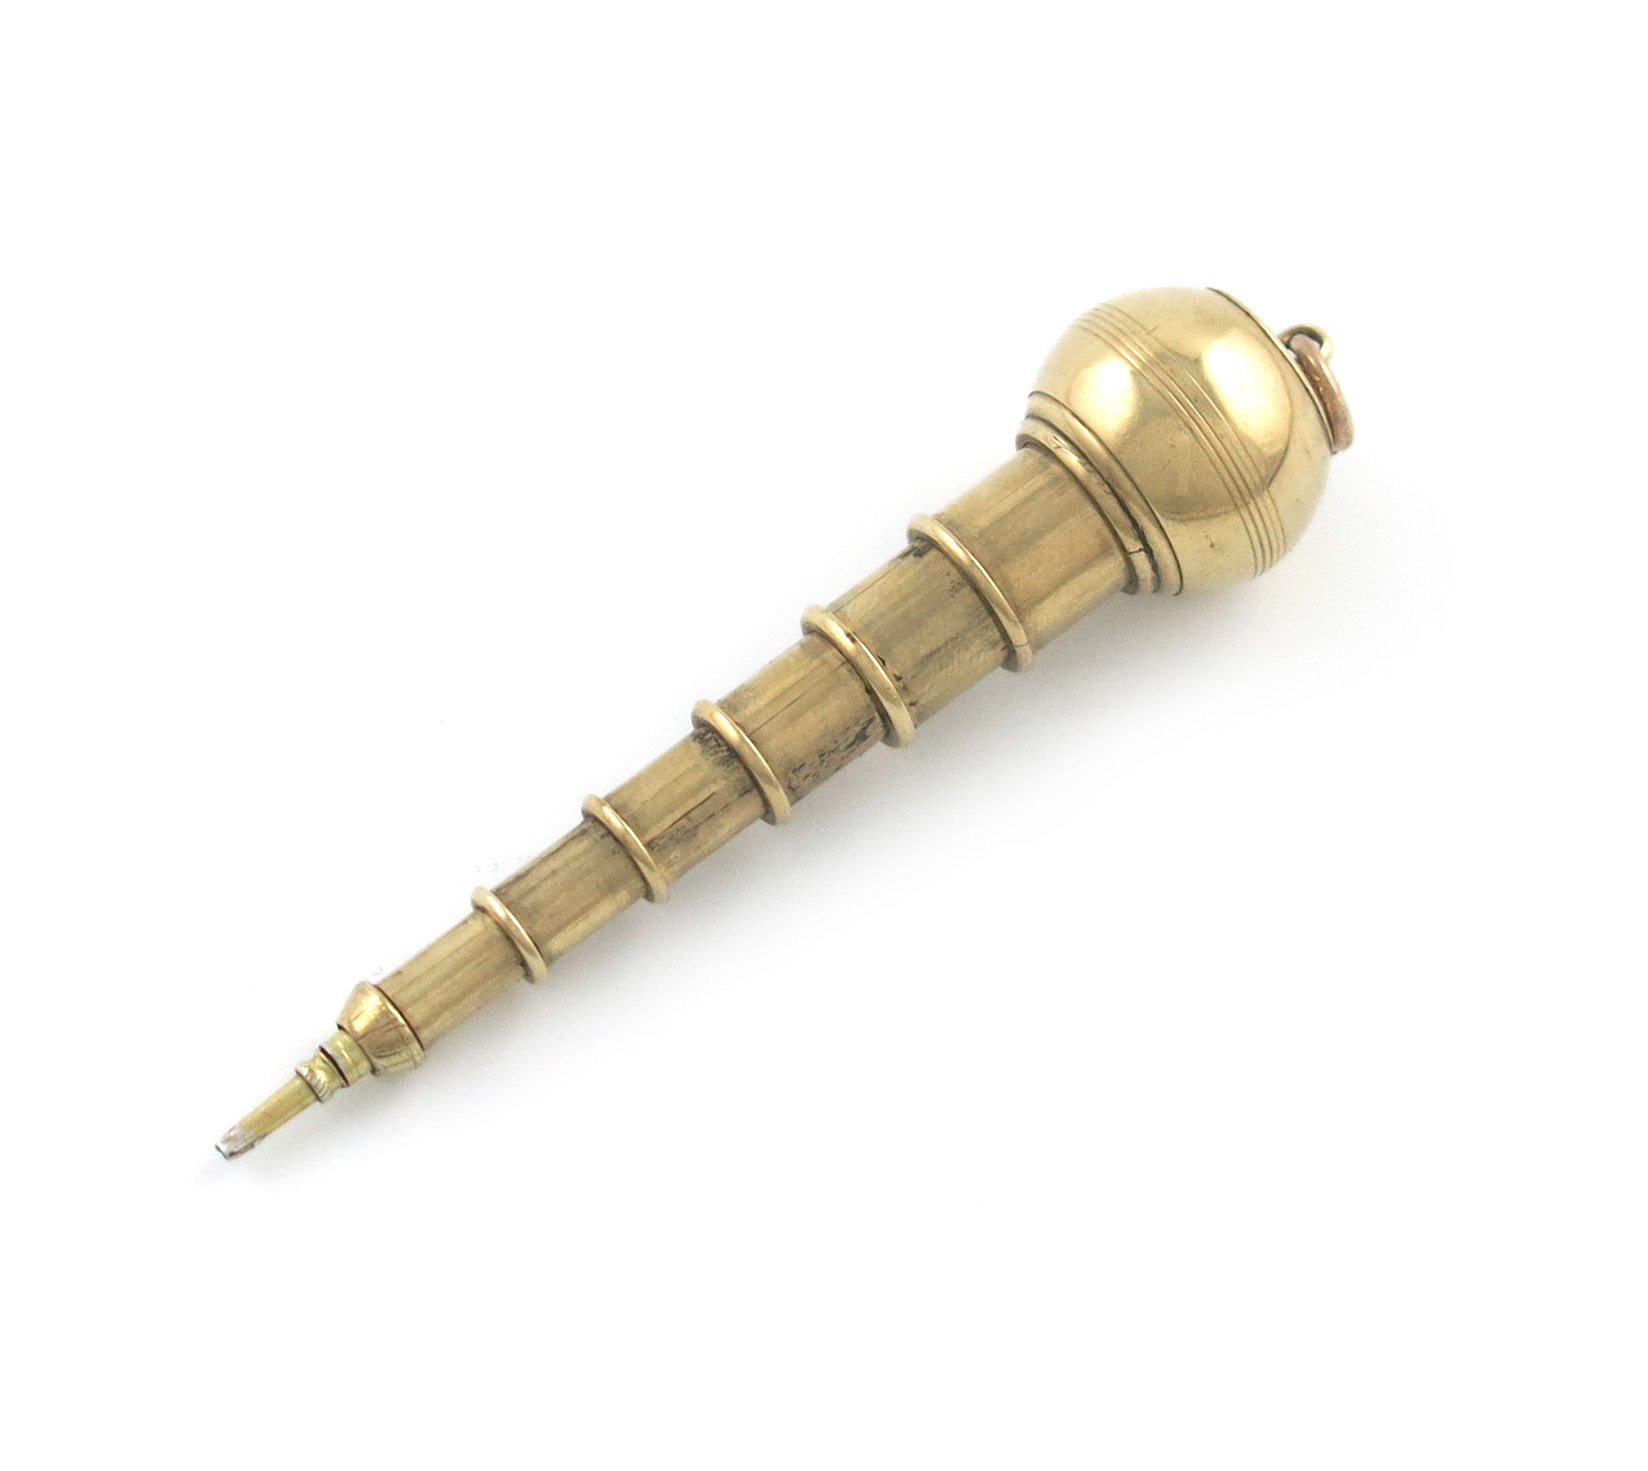 A Victorian novelty 10-carat gold plumb-bob pencil, marked W.T for Walter Thornhill, and design